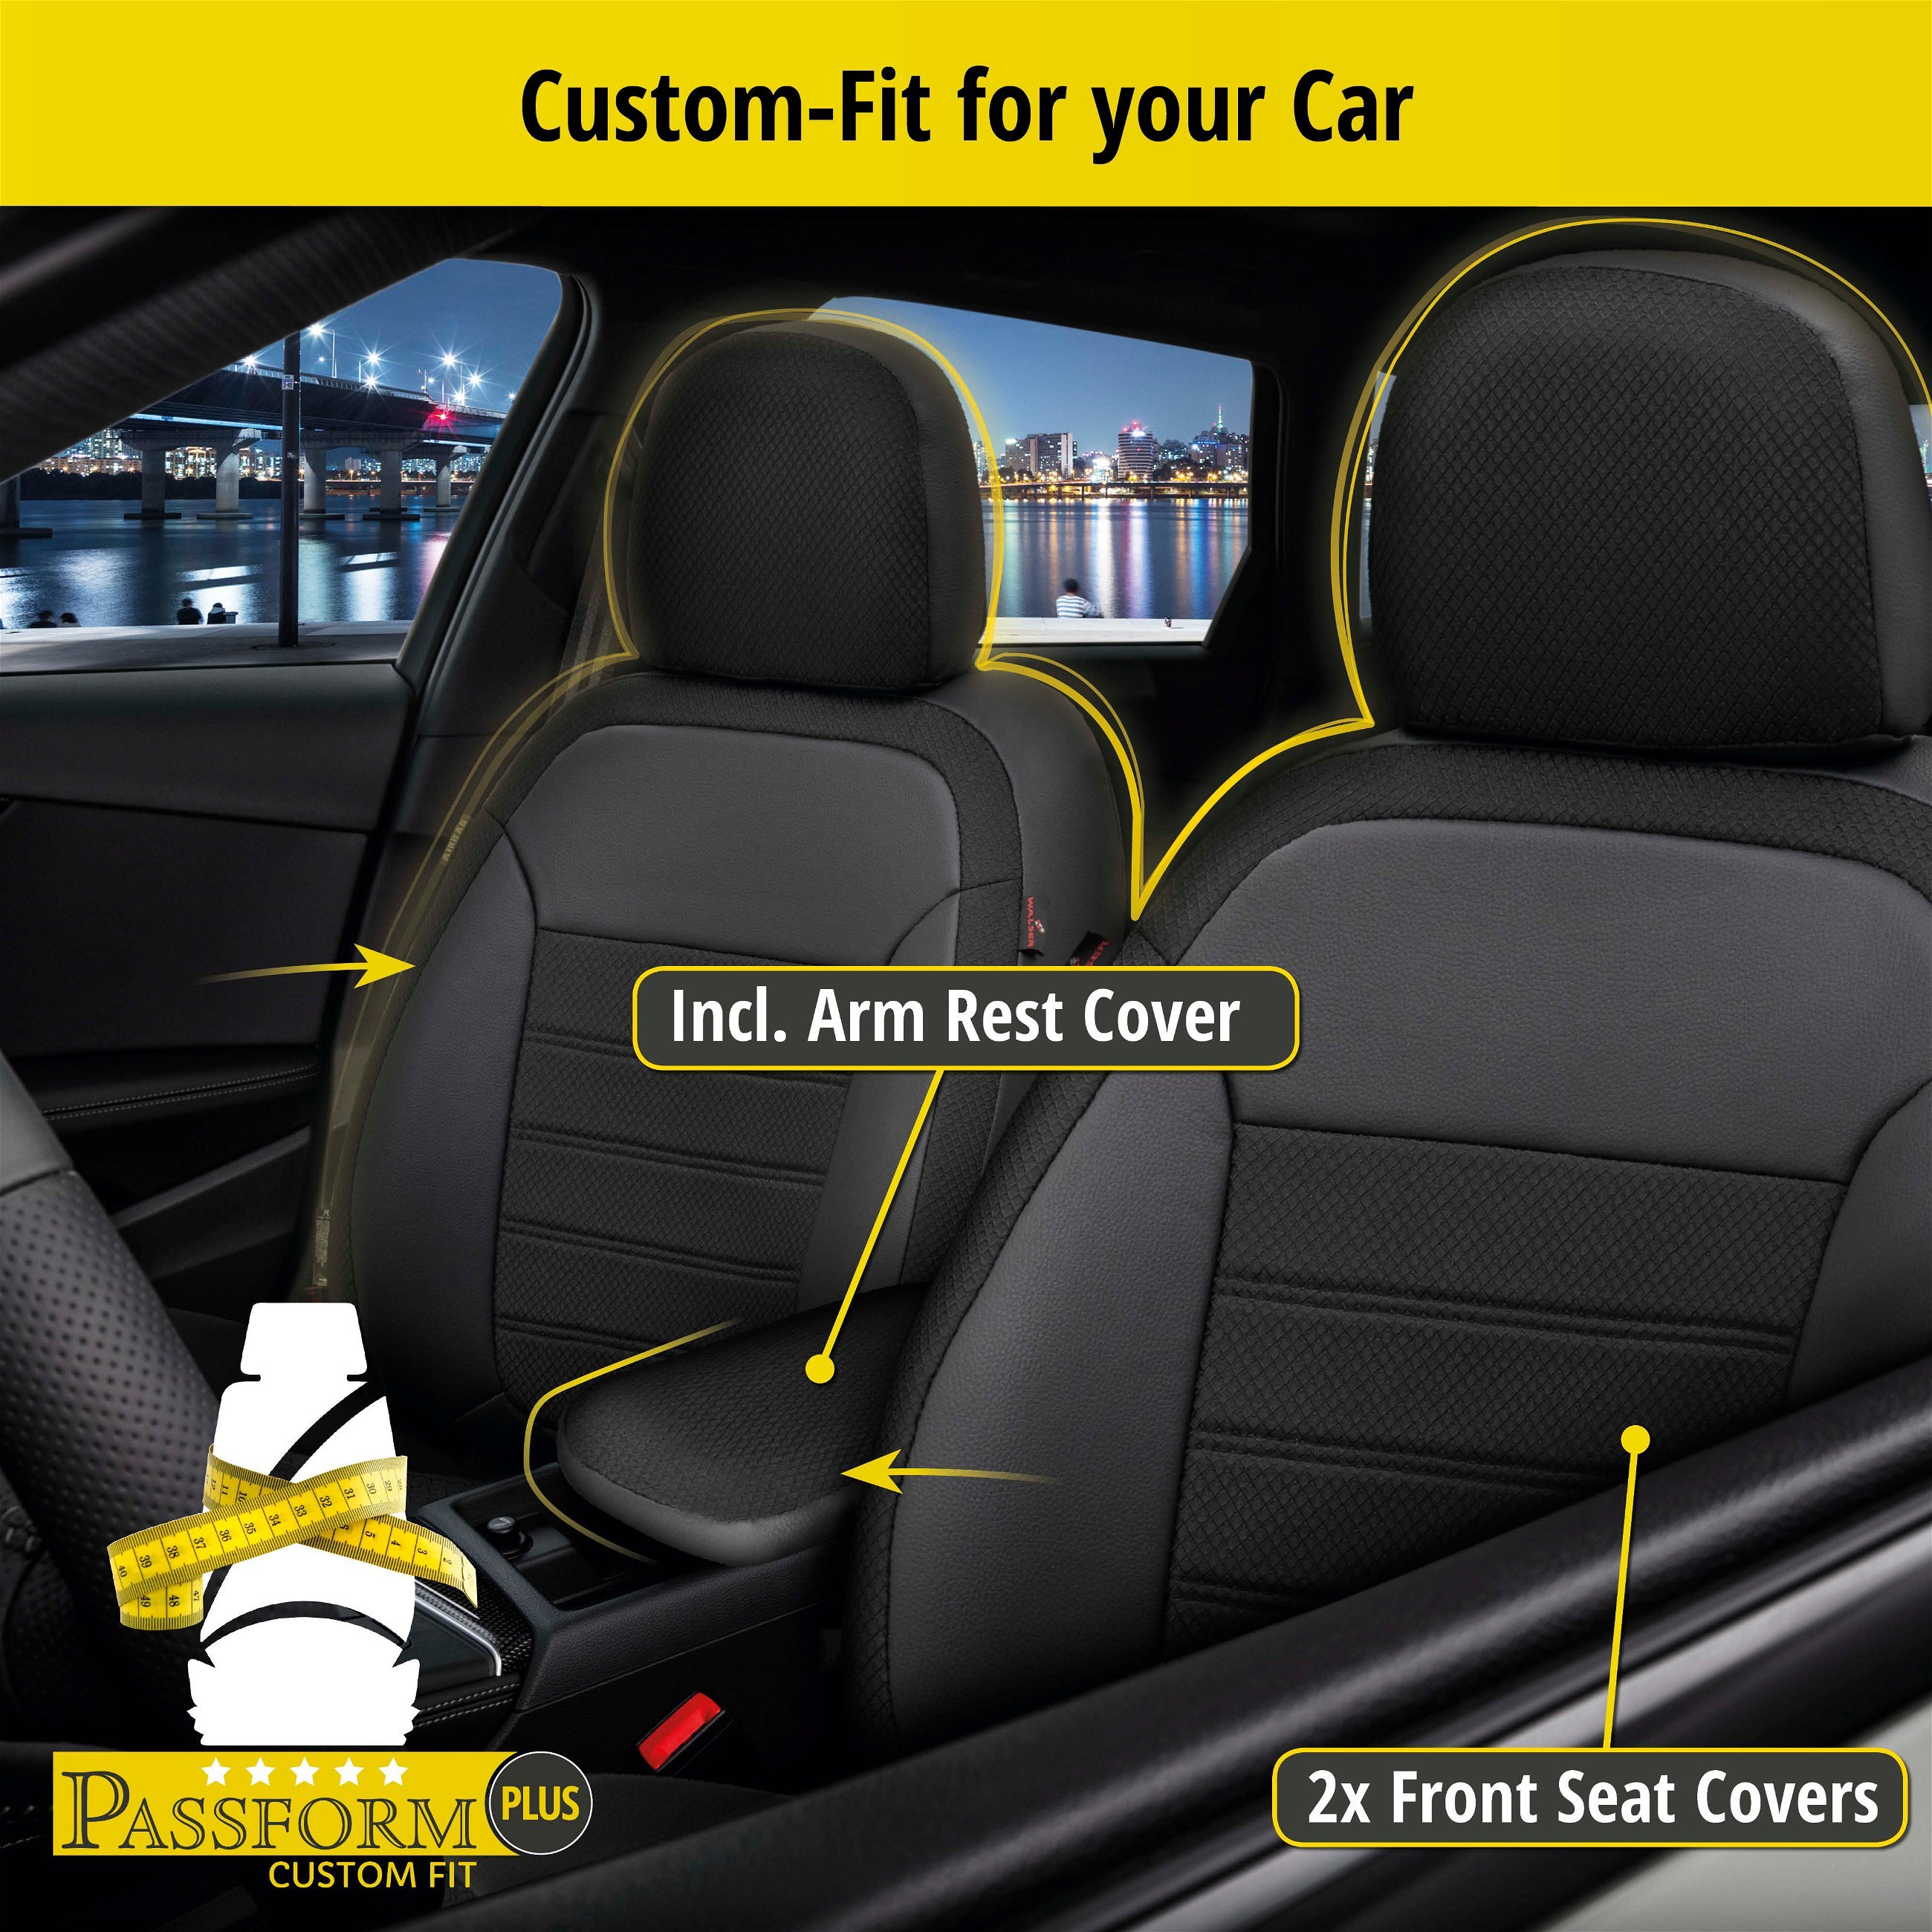 Seat Cover Aversa for Fiat Panda/Panda Classic 09/2003-Today, 2 seat covers for normal seats